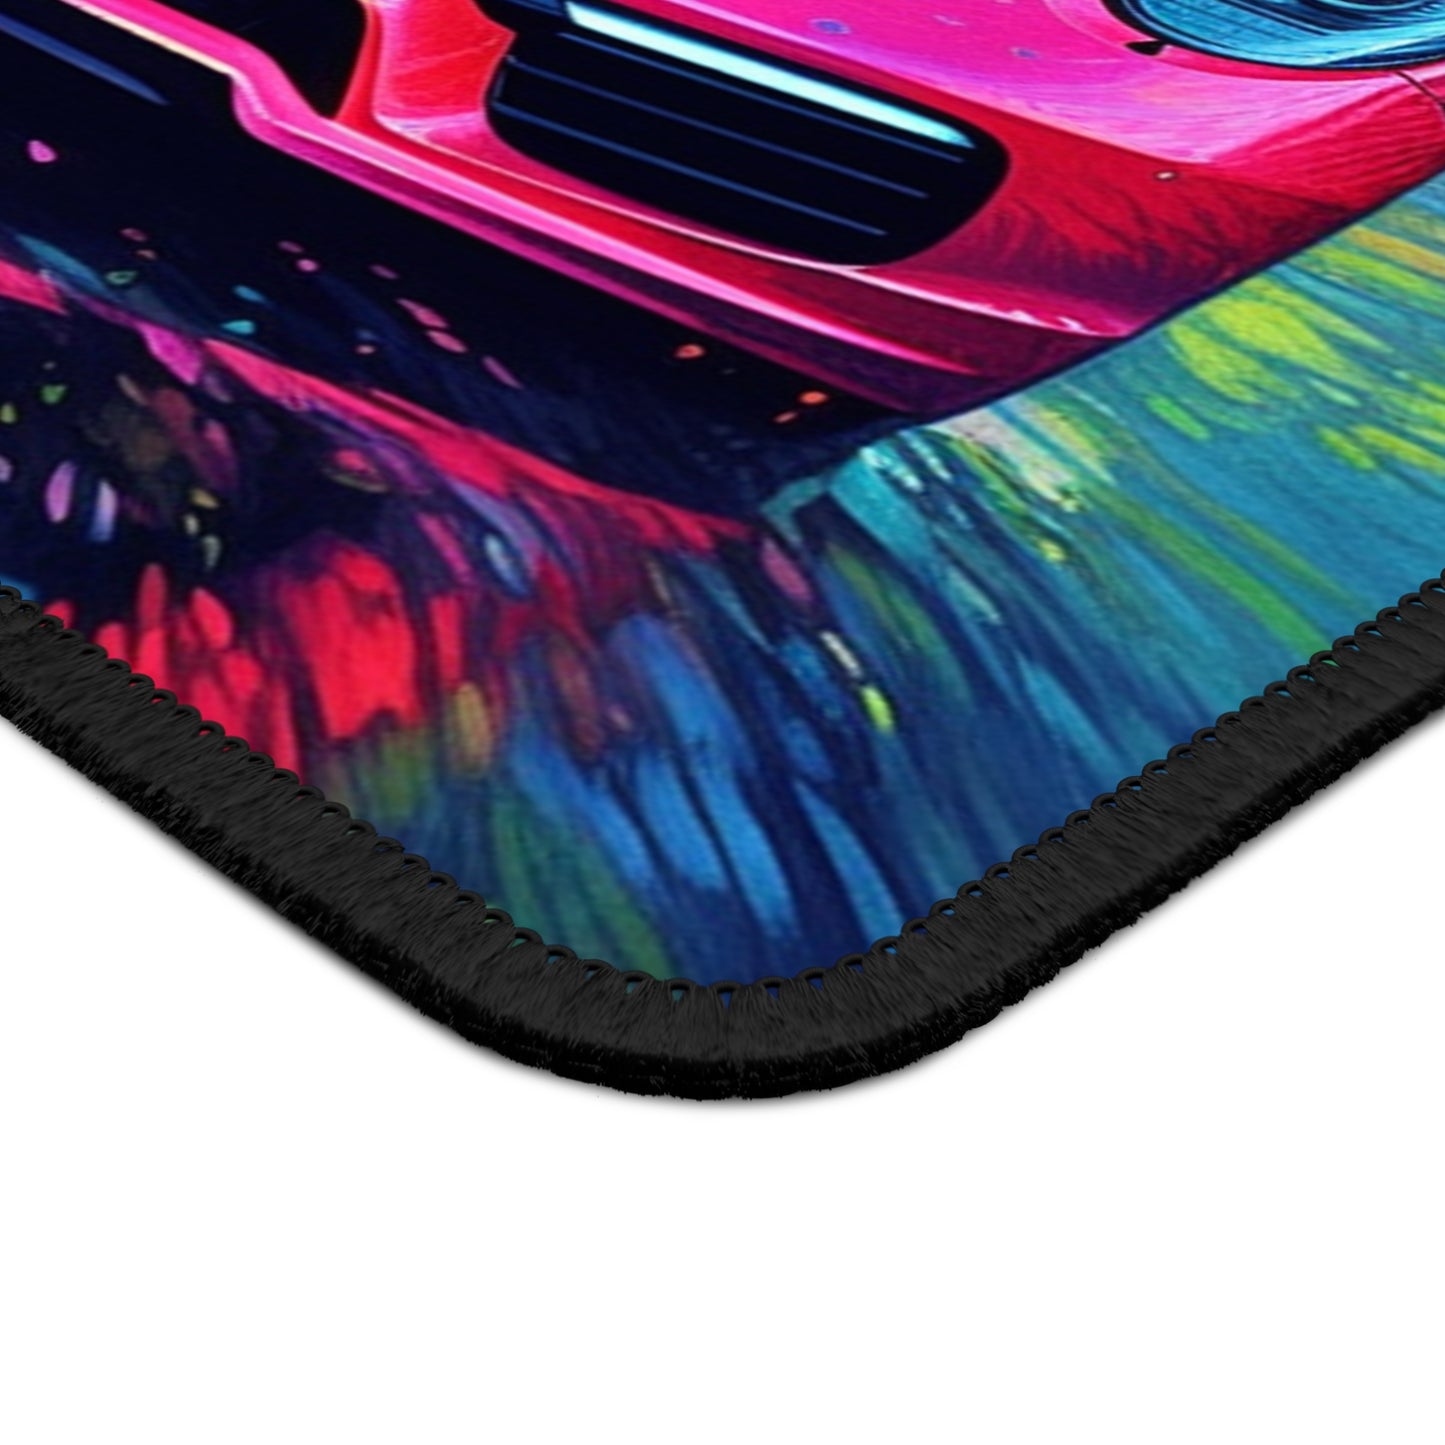 Gaming Mouse Pad  Pink Porsche water fusion 3